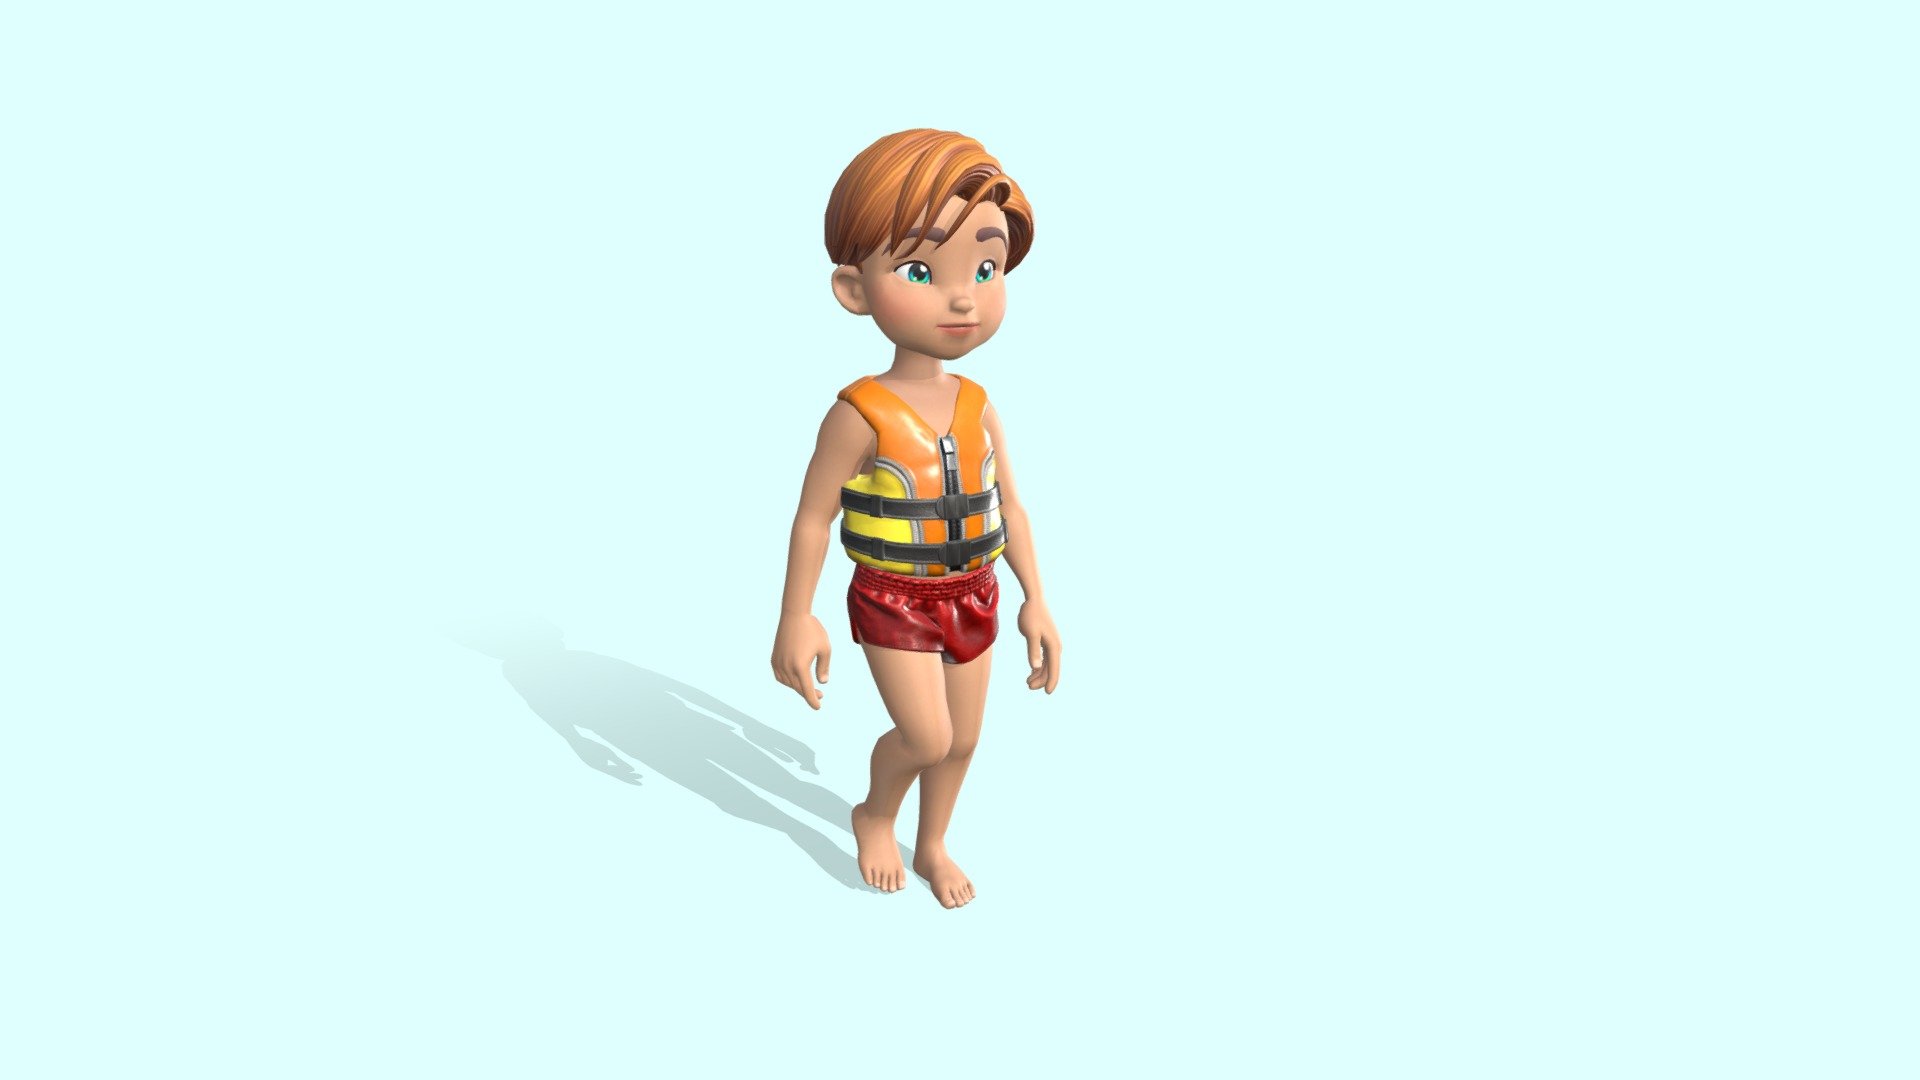 Beach Boy Character from the KEKOS Tropical Beach package.

Ready to import in your preferred videogame engine or 3D software.

FORMAT:

FBX

POLYGON COUNT:

~20k Triangles

TEXTURES:

PBR Textures: Diffuse + Normal map + Metallic (R) / Smoothness (A) / Ambient Oclussion (G)

Size: 2048x2048 for most of the assets. A few 4096x4096 for detailed parts.

PNG format

RIG:




Full human rig.

27 blendshapes for face expresions.

ANIMATIONS:




Idle

Walk

Run

Jump

Floating

Sit
 - KEKOS Tropical Beach - Beach Boy - Buy Royalty Free 3D model by Mameshiba Games (@MameshibaGames) 3d model